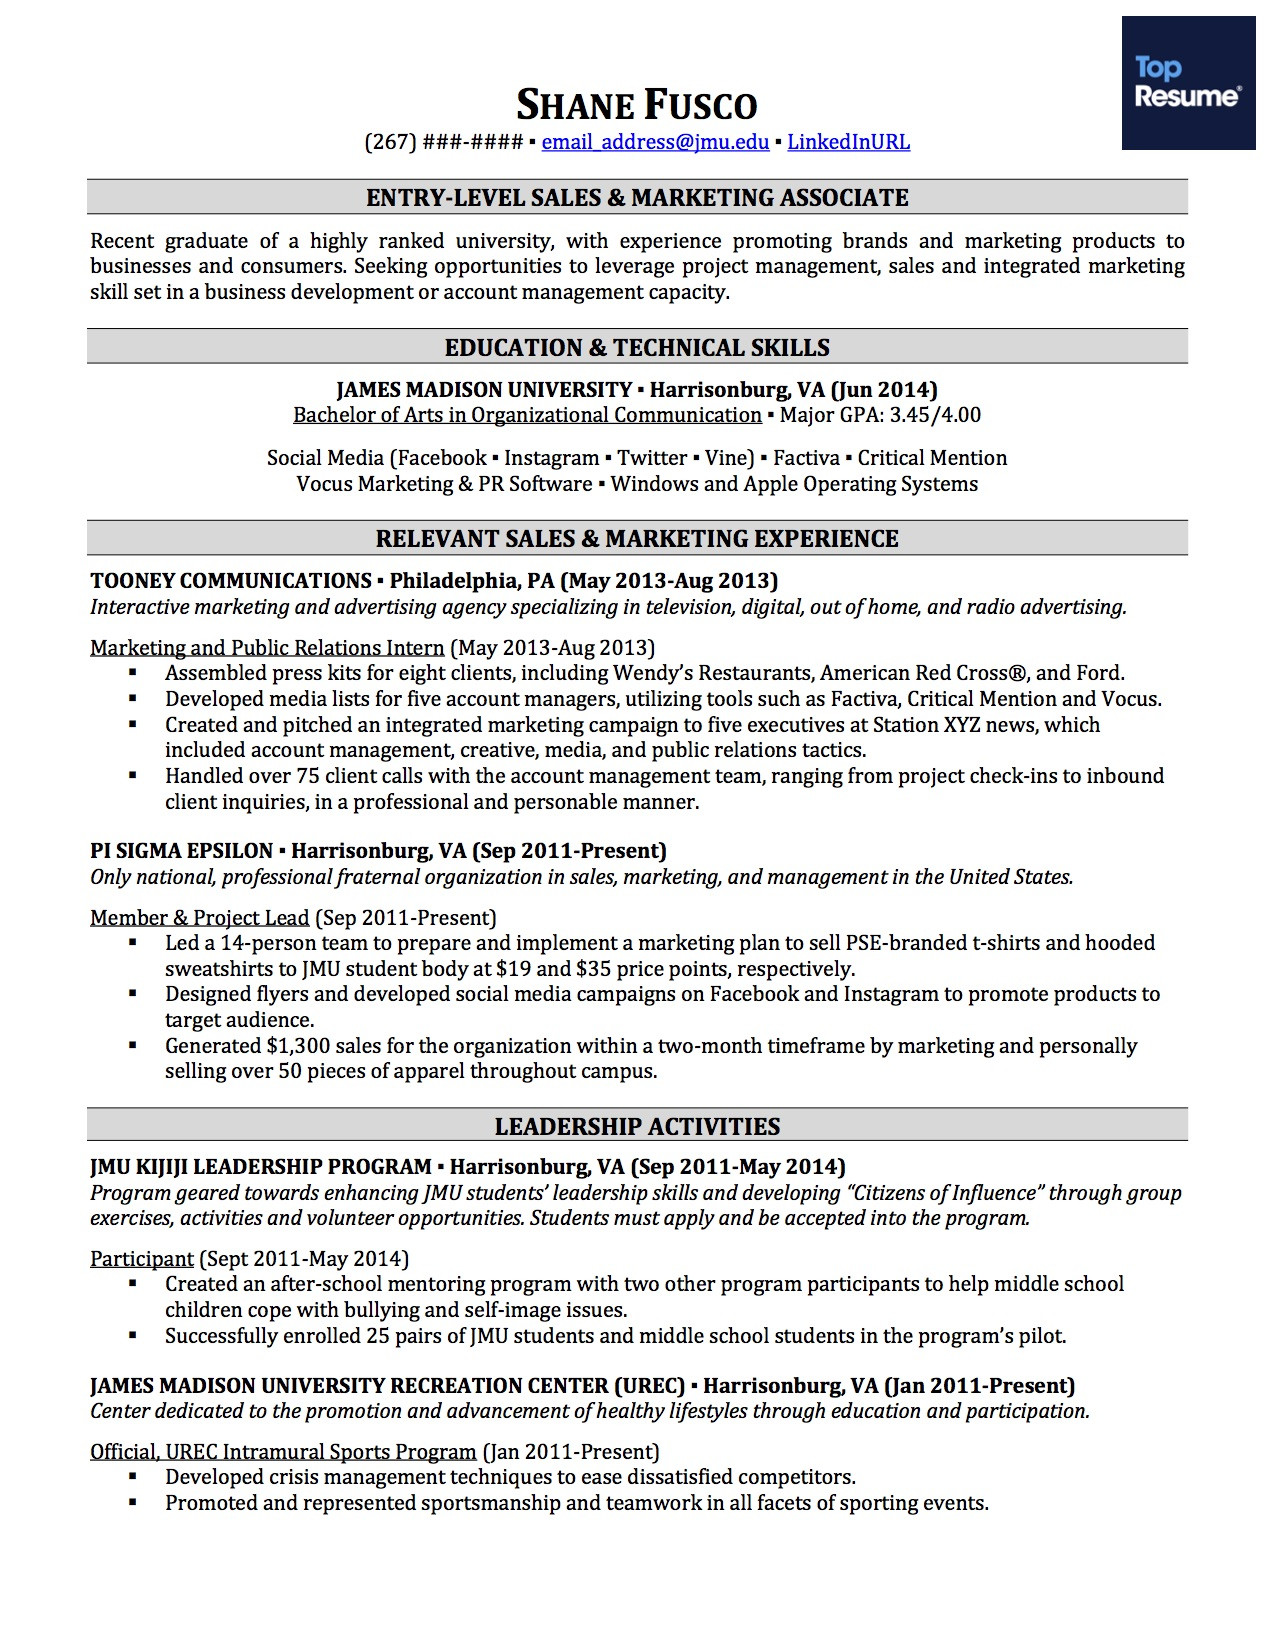 Mba Application Resume Sample Having No Experience How to Make A Great Resume with No Experience topresume